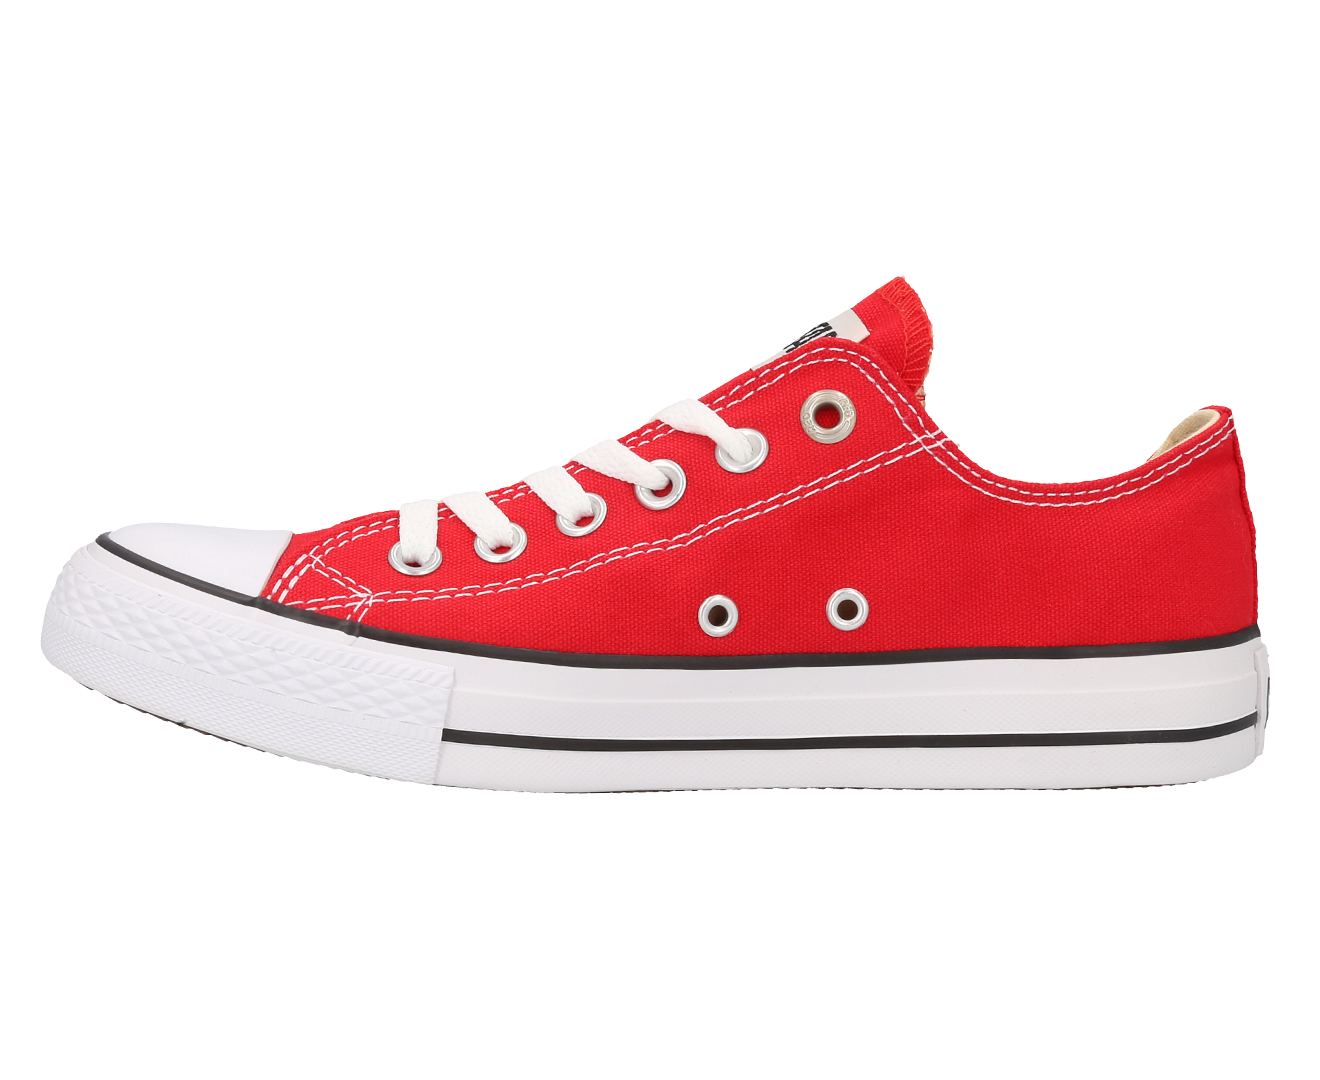 Converse Chuck Taylor All Star Shoe - Ox Red | Catch.co.nz